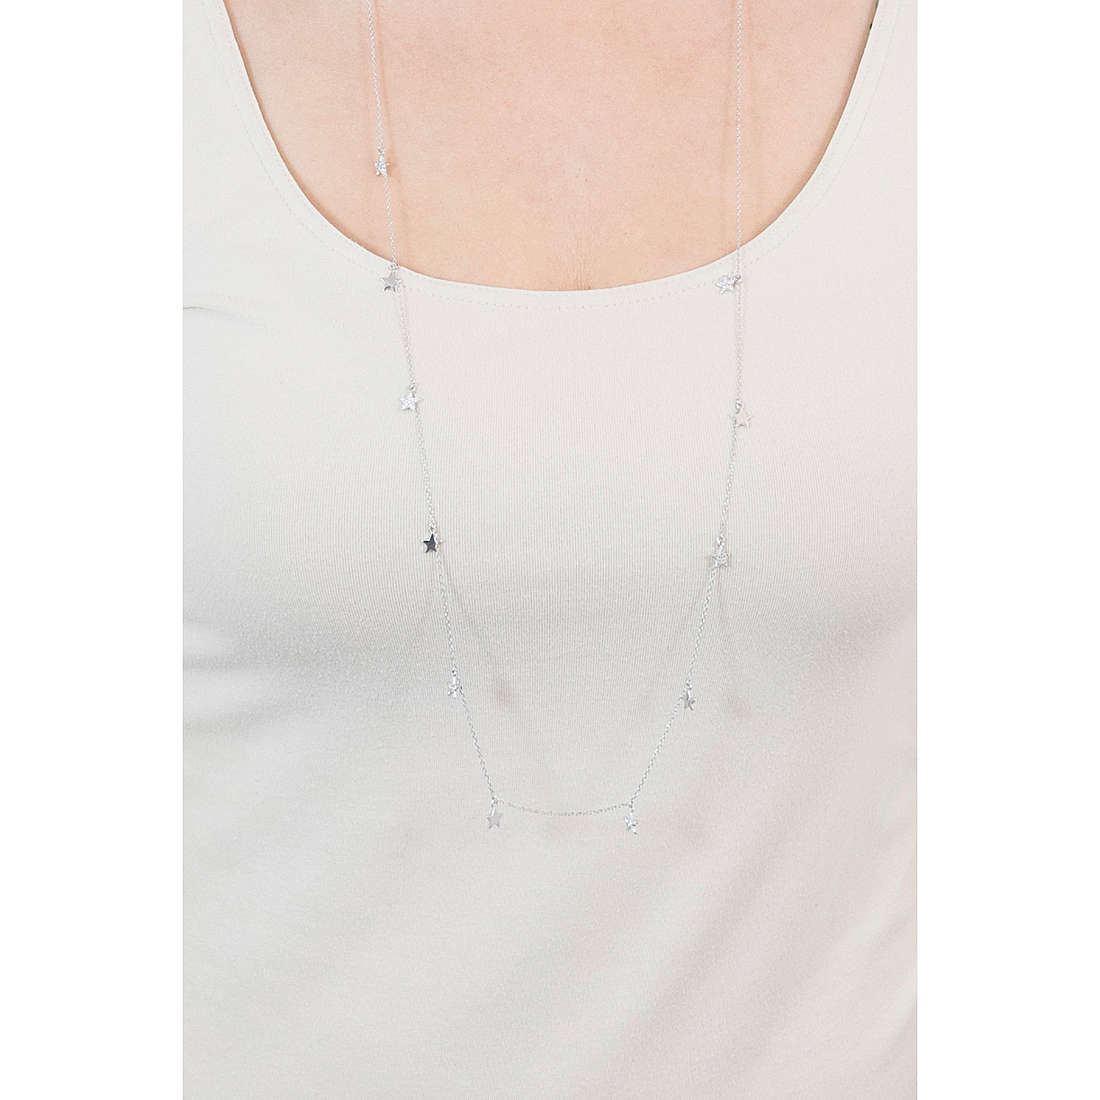 GioiaPura necklaces woman INS028CT093 wearing